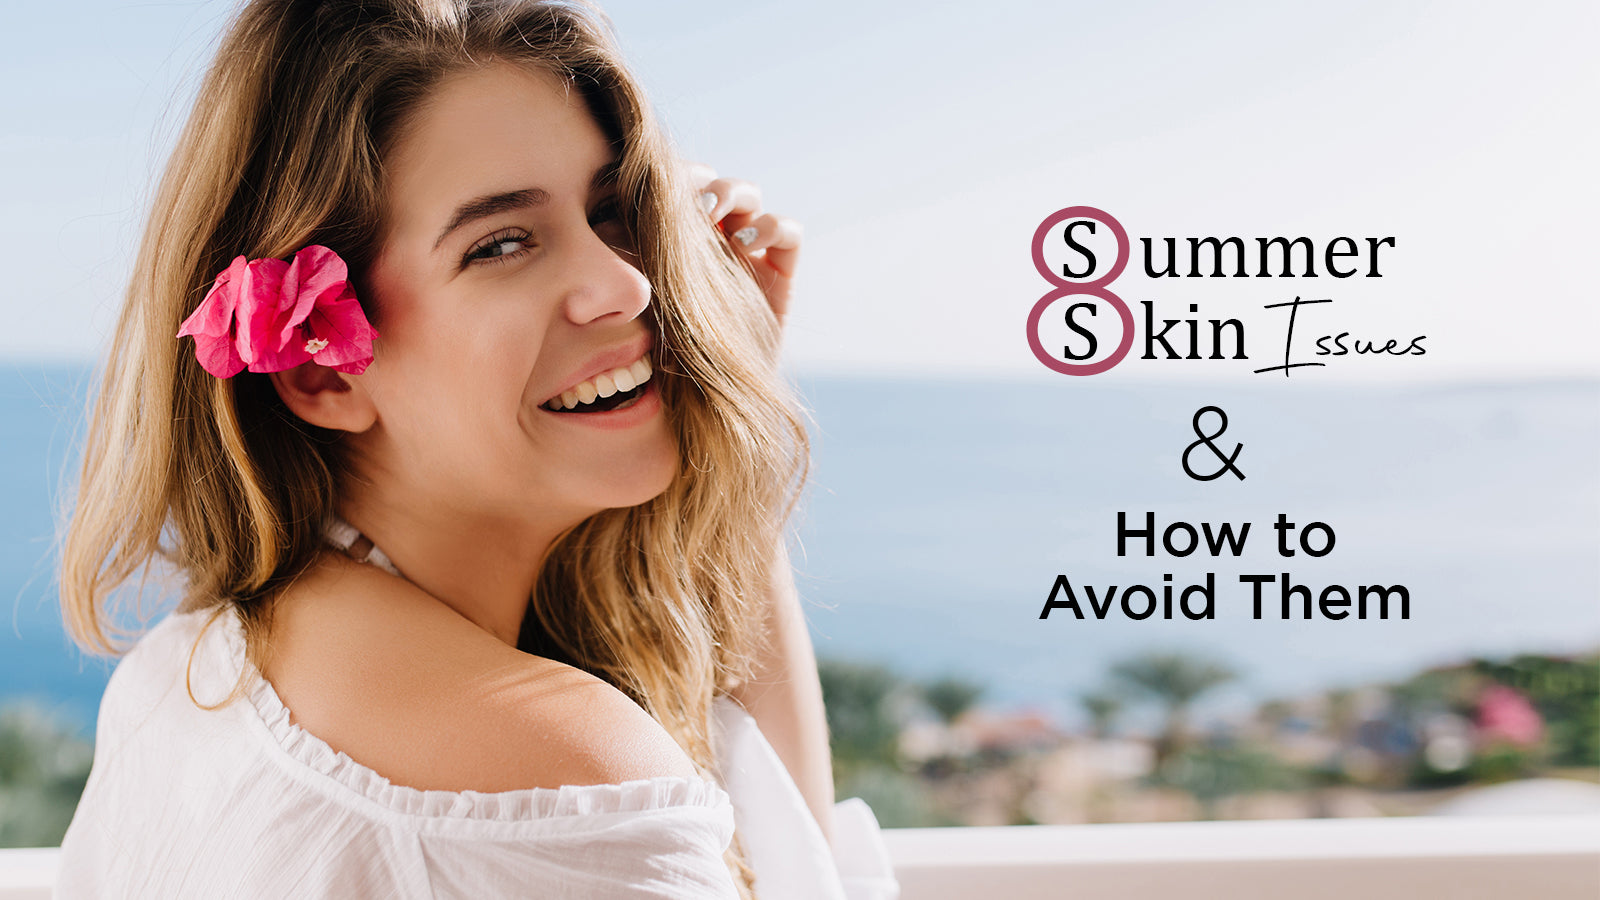 Summer Skin Issues and How to Avoid Them